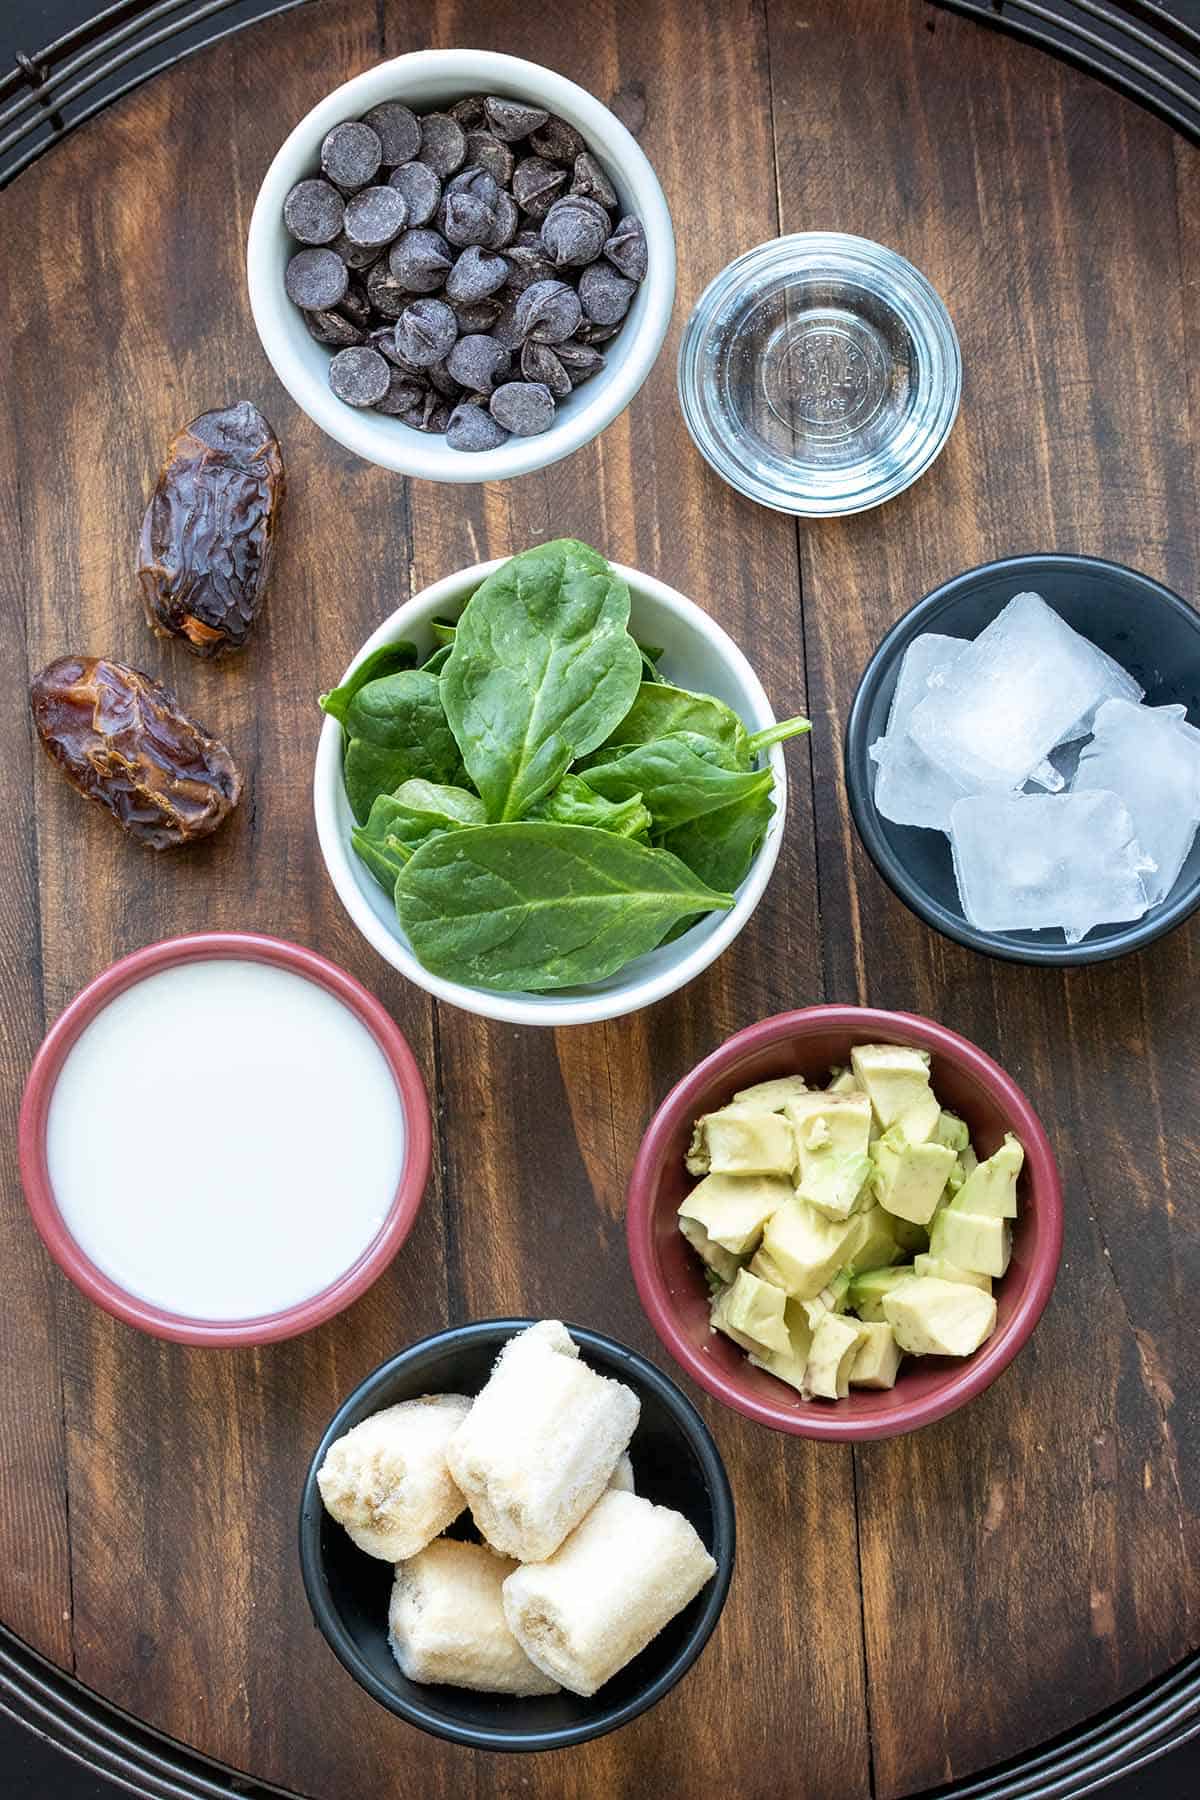 Different colors bowls with chocolate chips, clear liquid, ice, avocado, bananas, spinach and milk next to dates on a wooden surface.